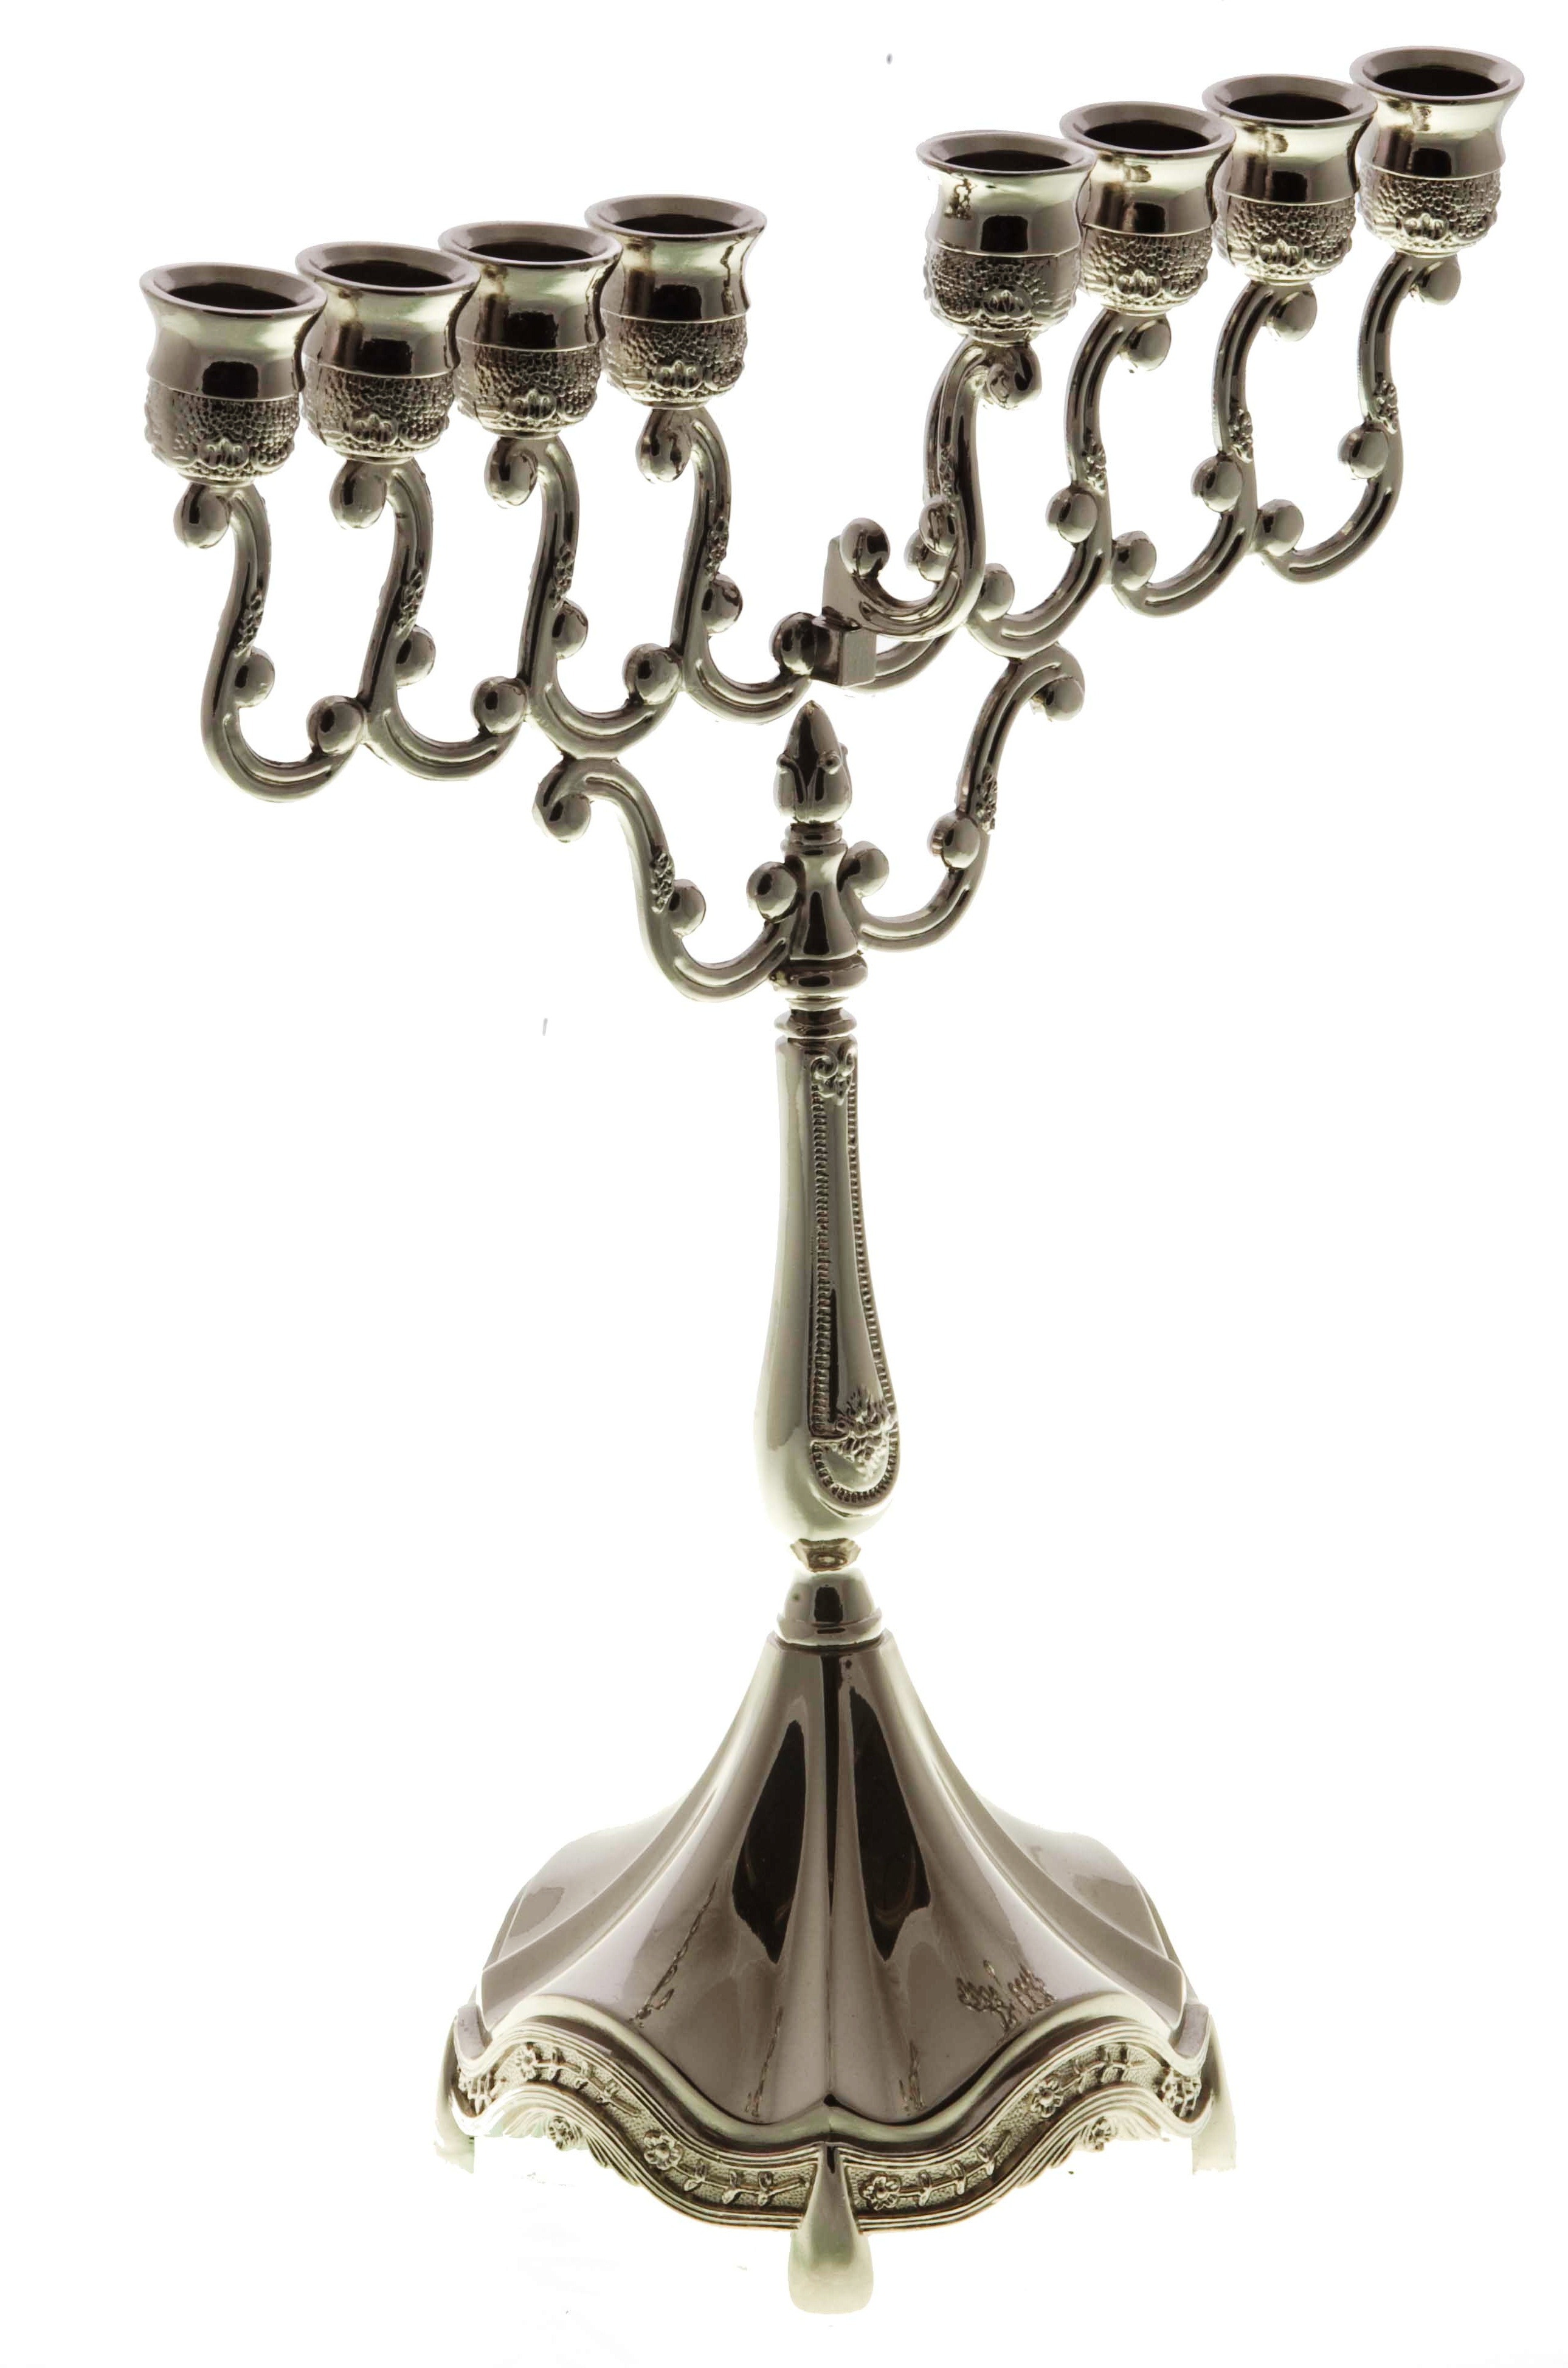 Nickel Hanukkah Menorah with Floral Pattern and Branched Design